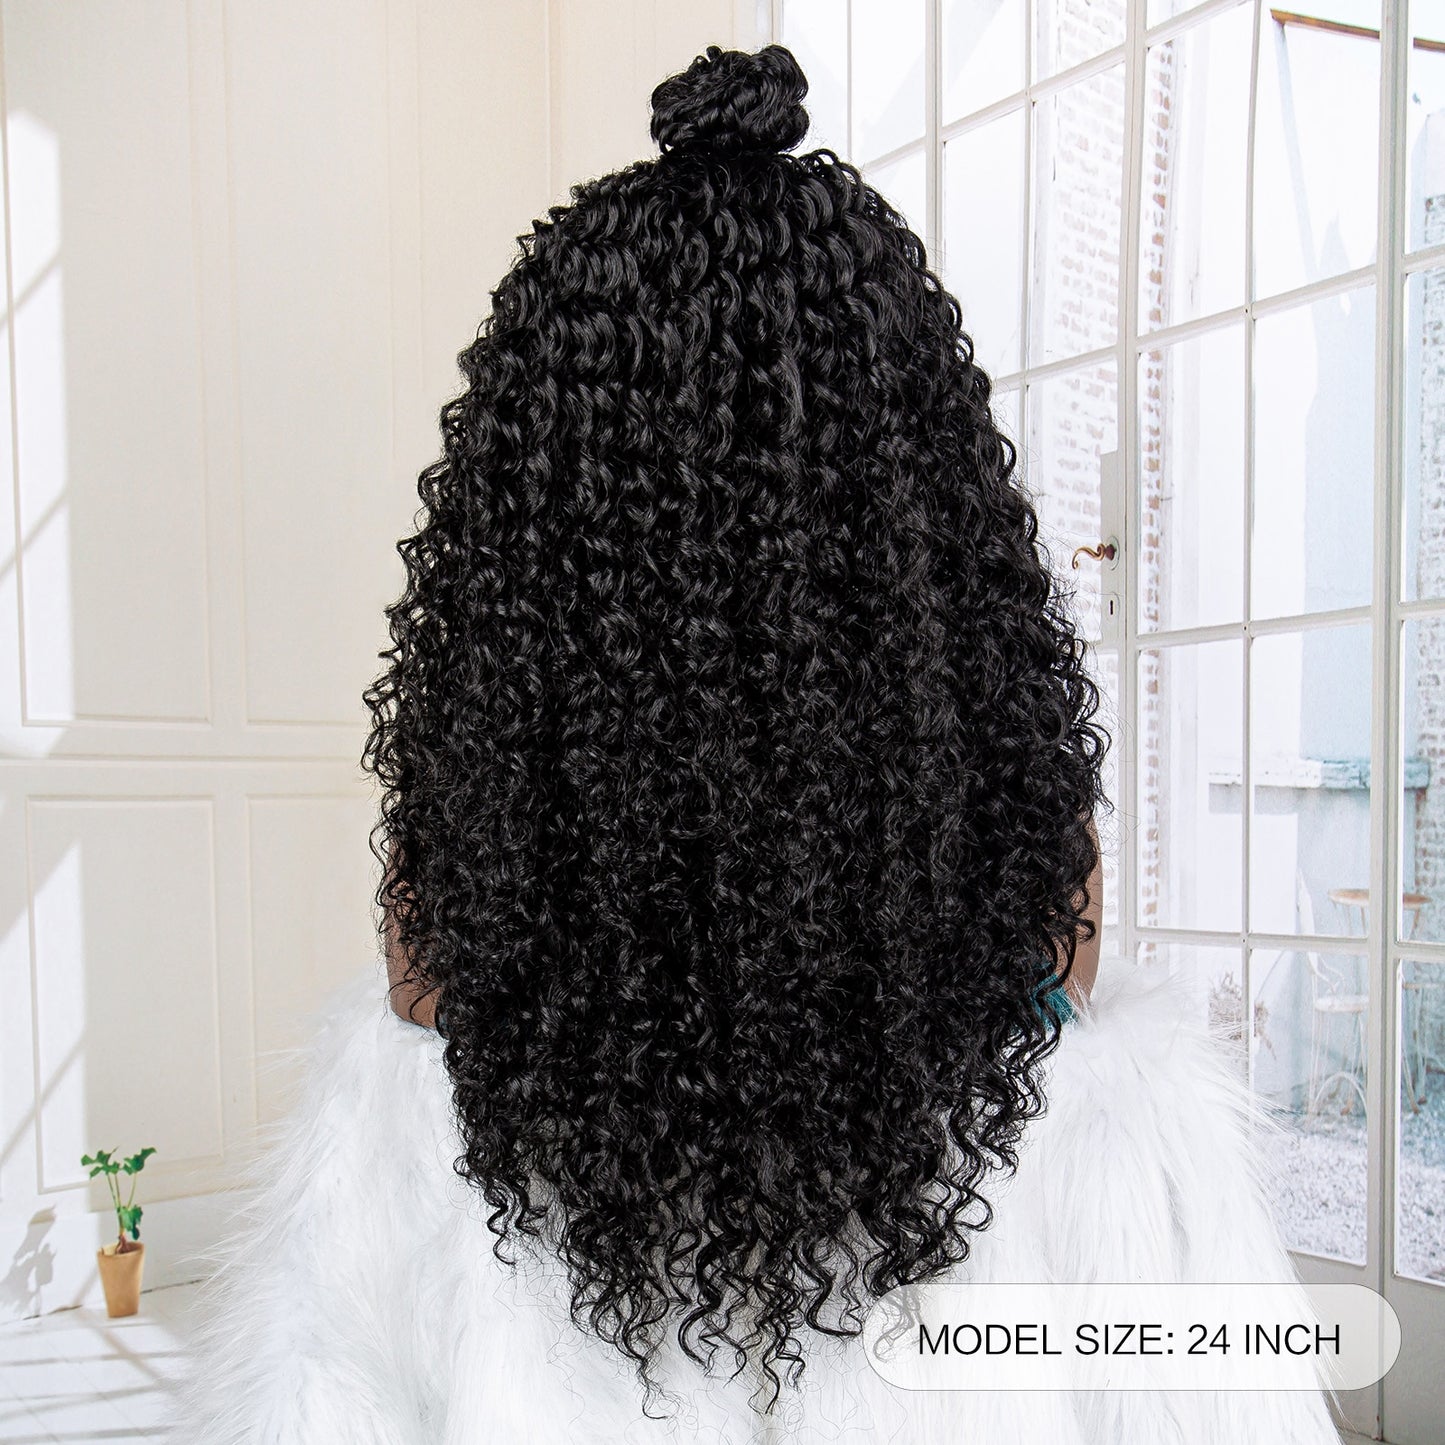 Synthetic Kinky Curly Wave Braided Wigs 13x4 Lace Frontal Afro Wigs